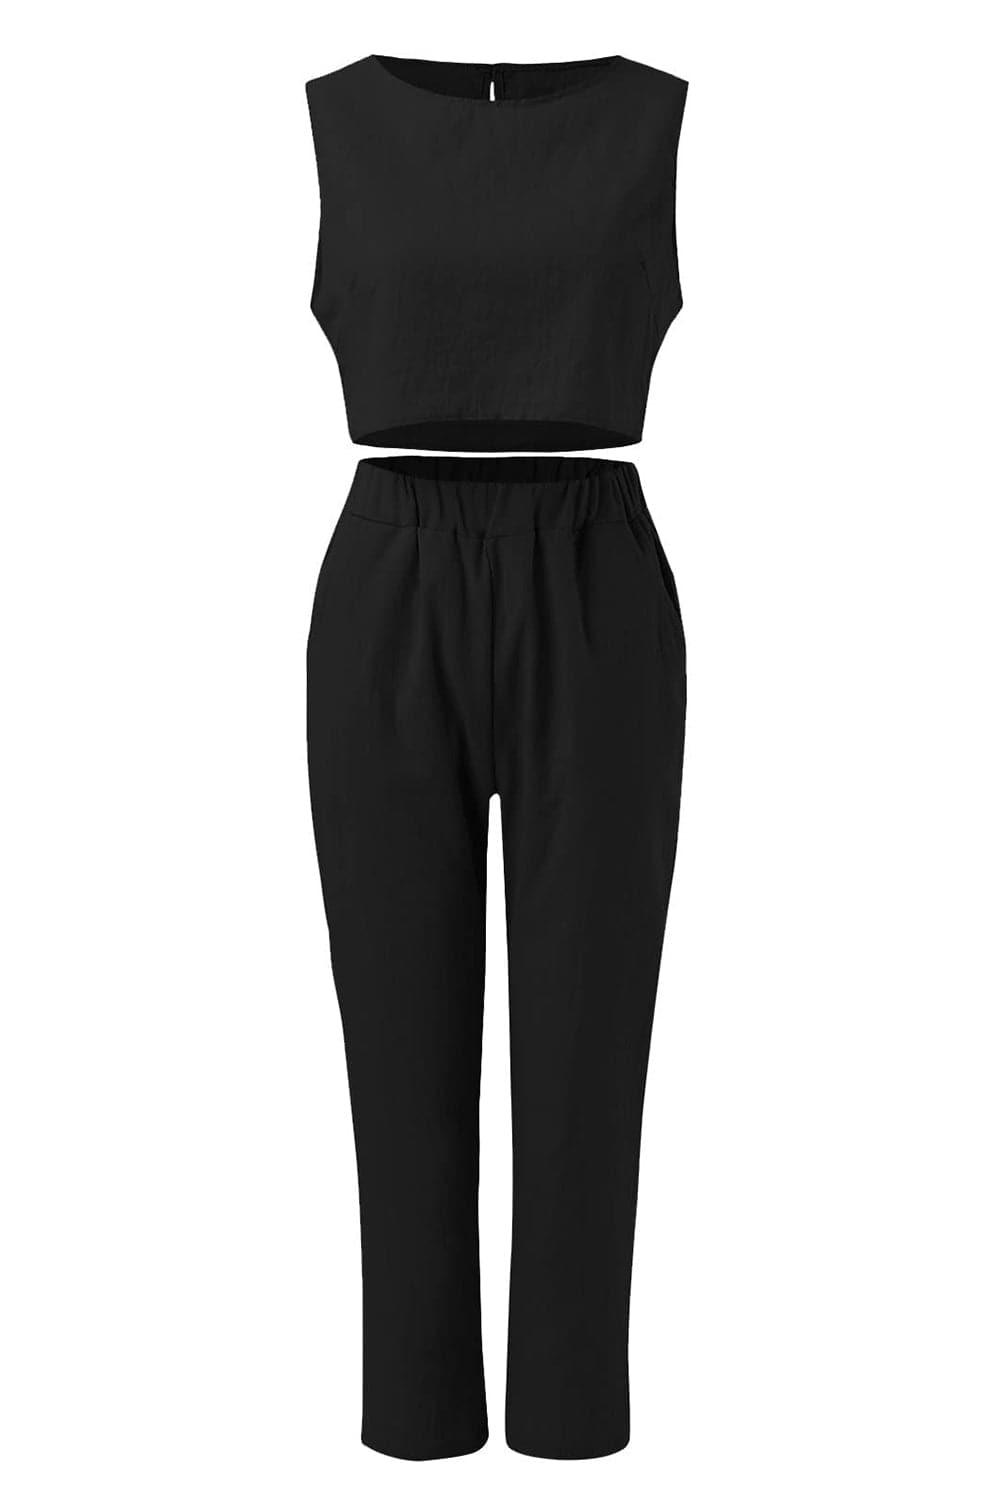 Round Neck Top and Pants Set - SwagglyLife Home & Fashion